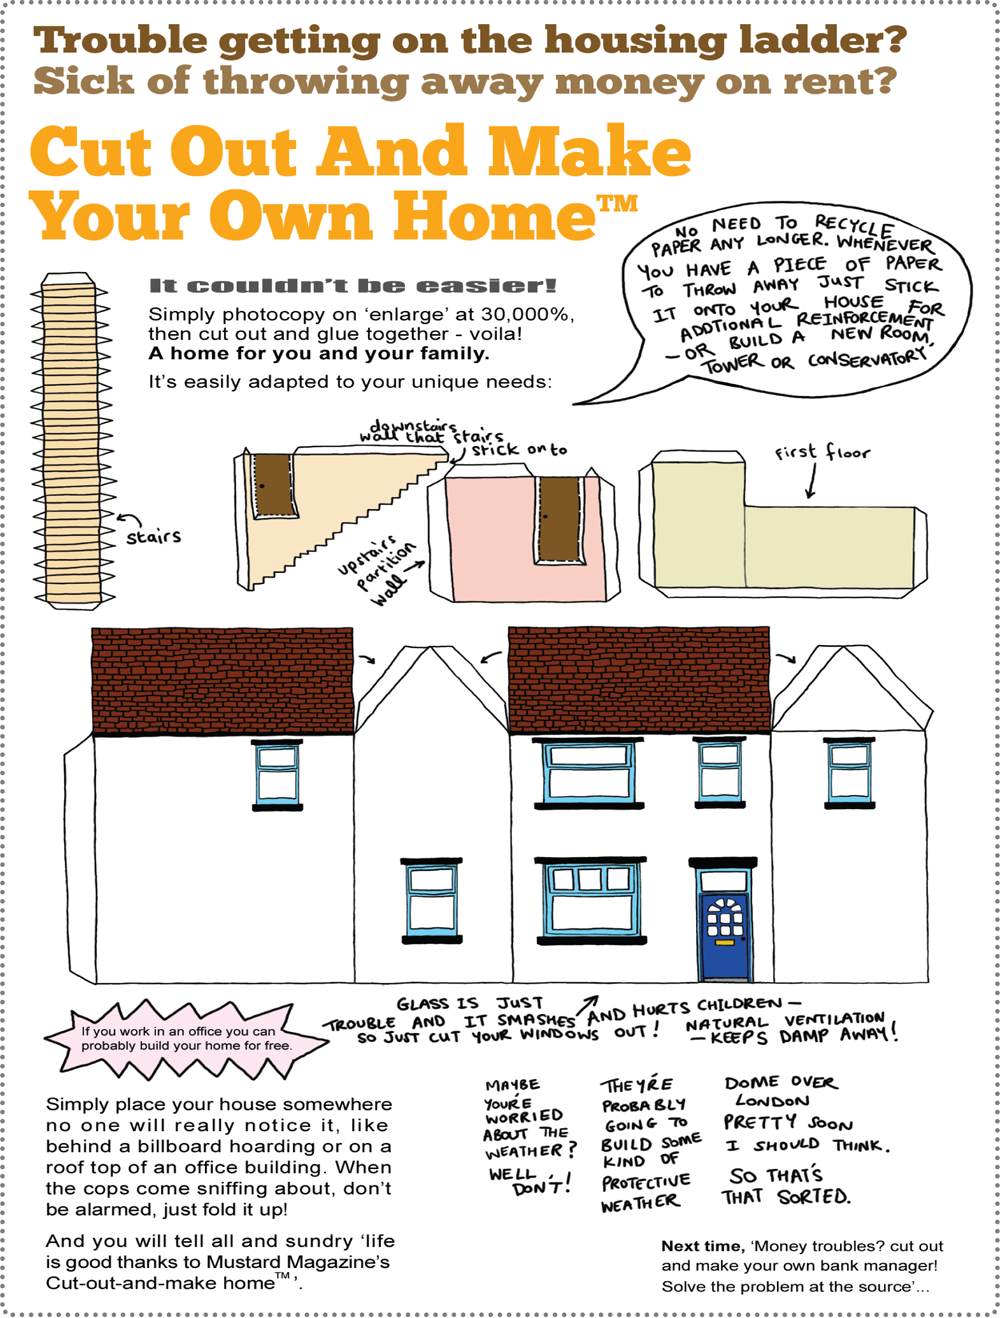 Cut Out and Make Your Own Home